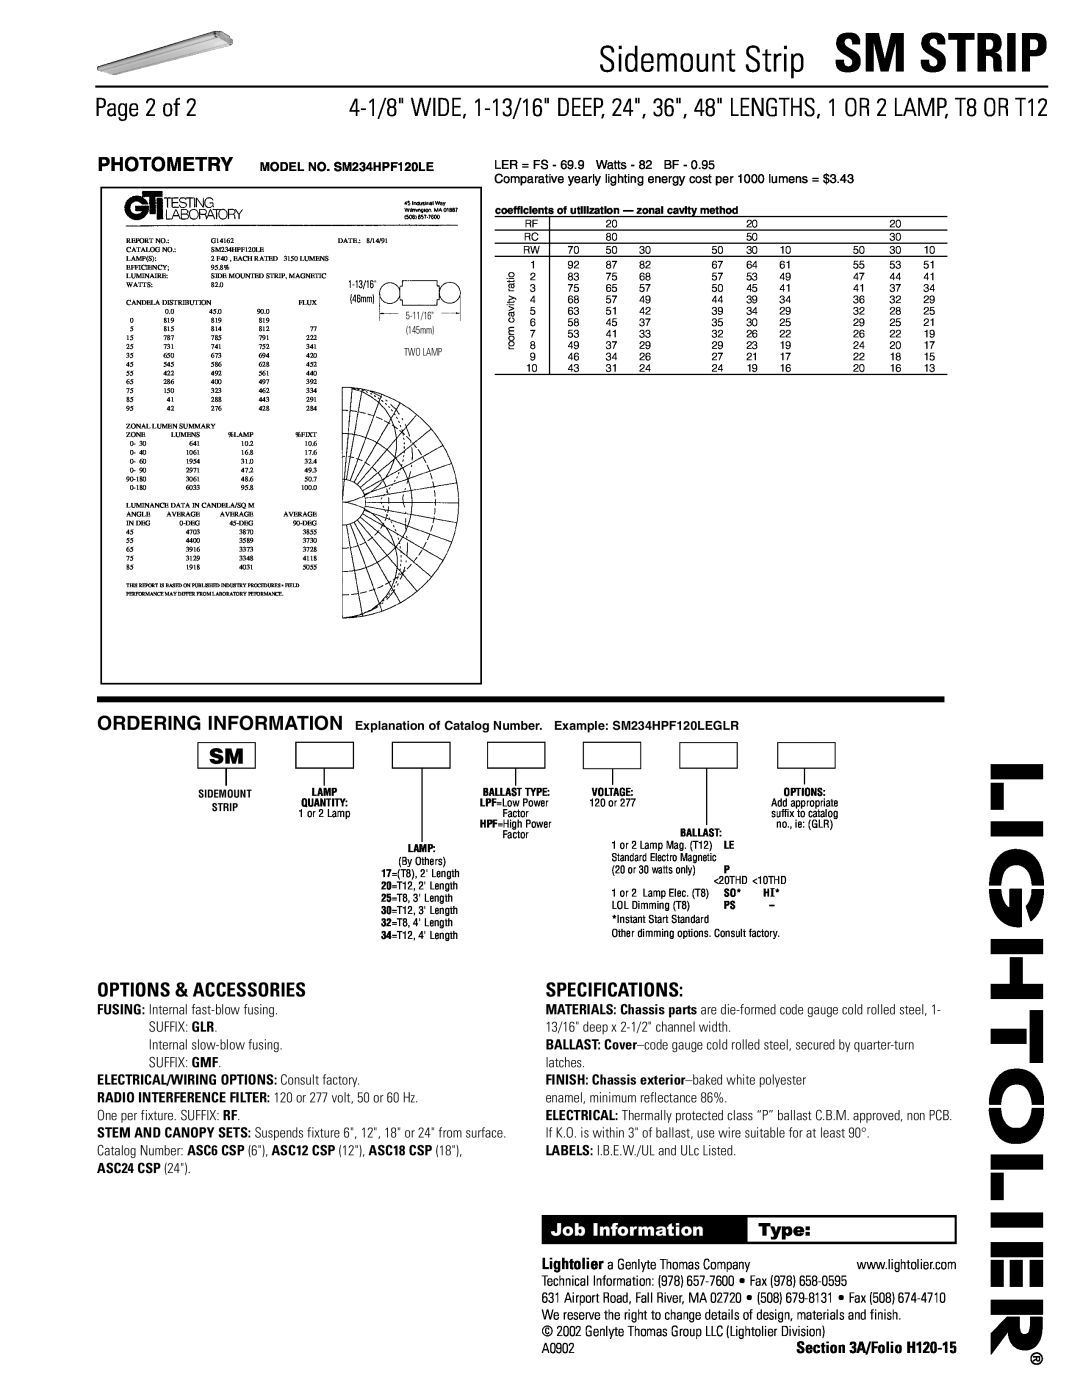 Lightolier SM STRIP Page 2 of, Options & Accessories, Specifications, Sm Strip, Sidemount Strip, Photometry, Type 